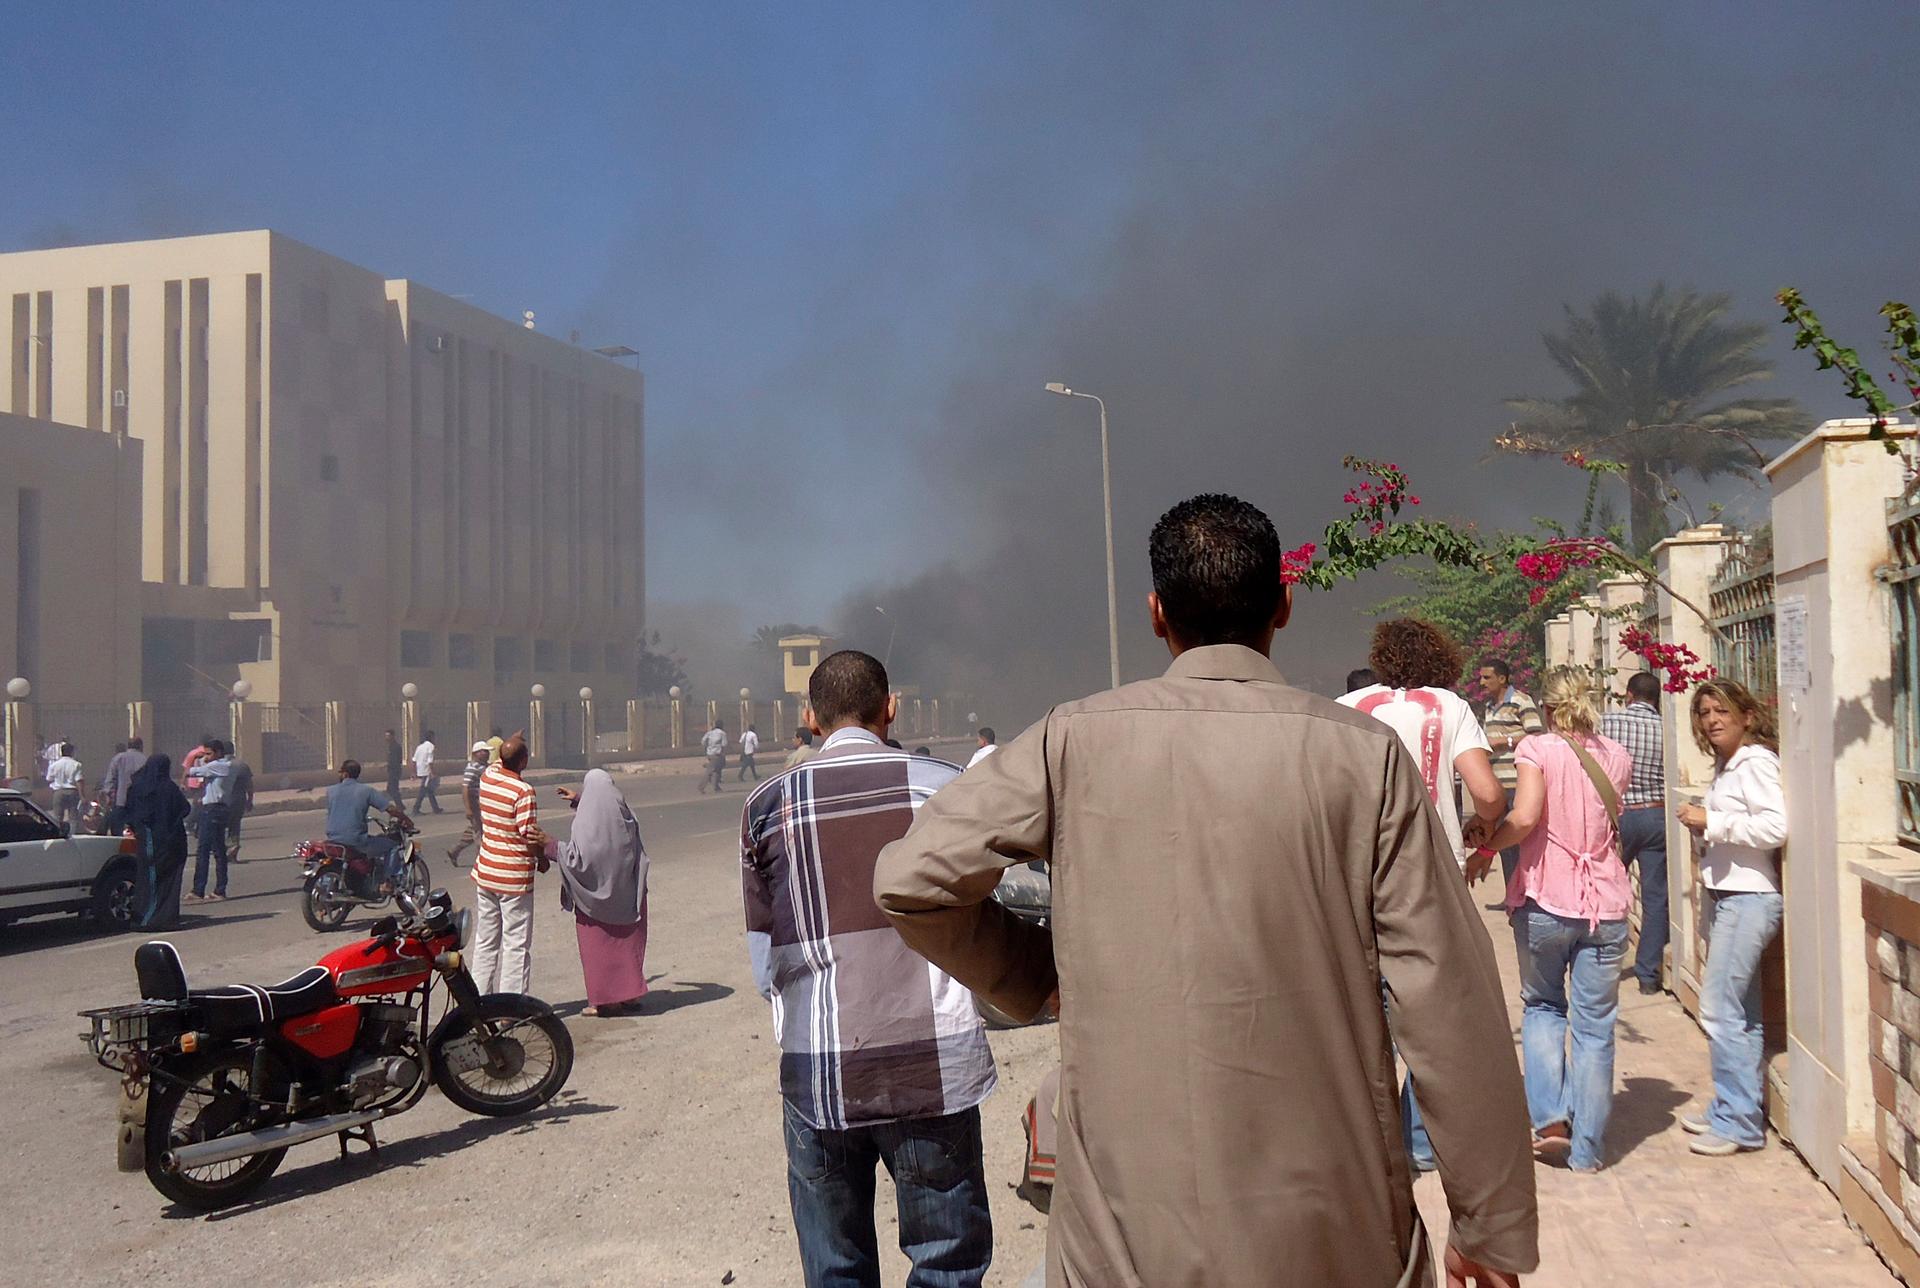 Residents and tourists watch as smoke rises from a state security building in the Sinai after a car bomb blast. Medical sources said three were killed and 48 injured in the attack.